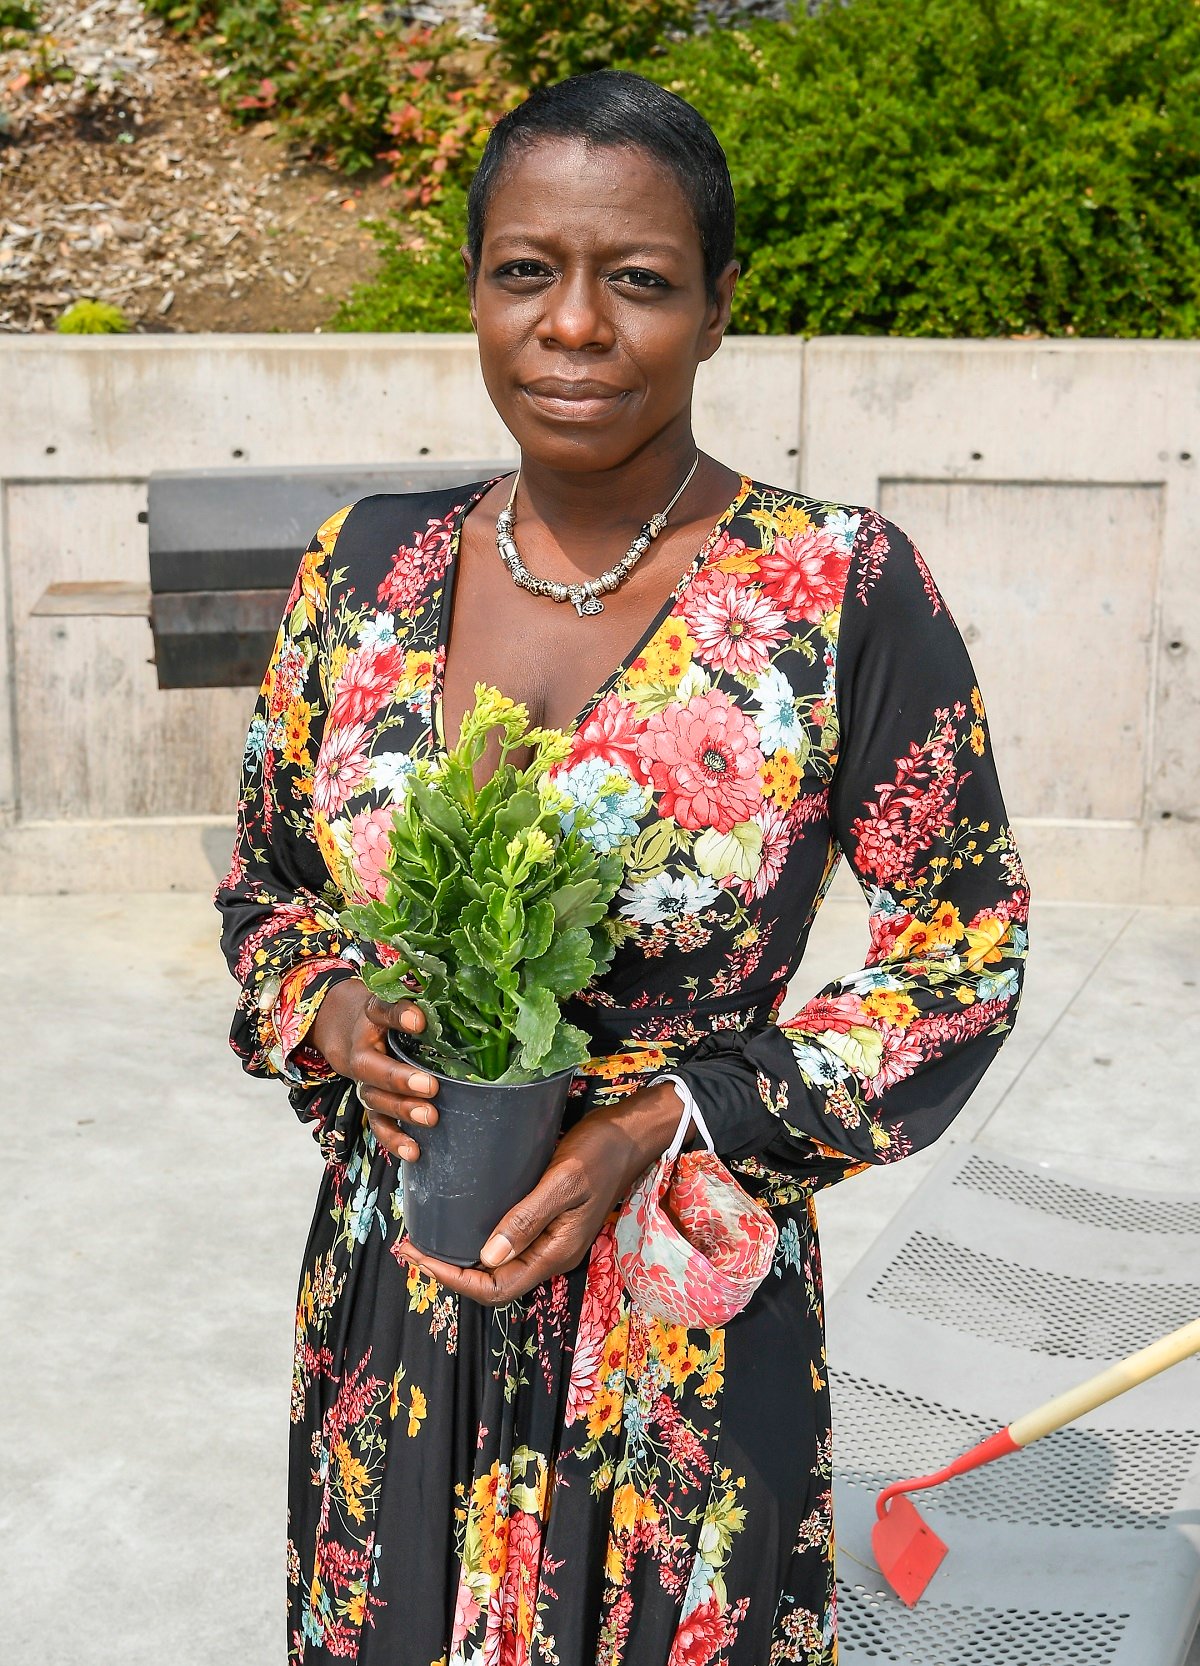 Sekyiwa Shakur attending the Tupac Amaru Shakur Memorial Planting to Commemorate the Anniversary of her brother's death